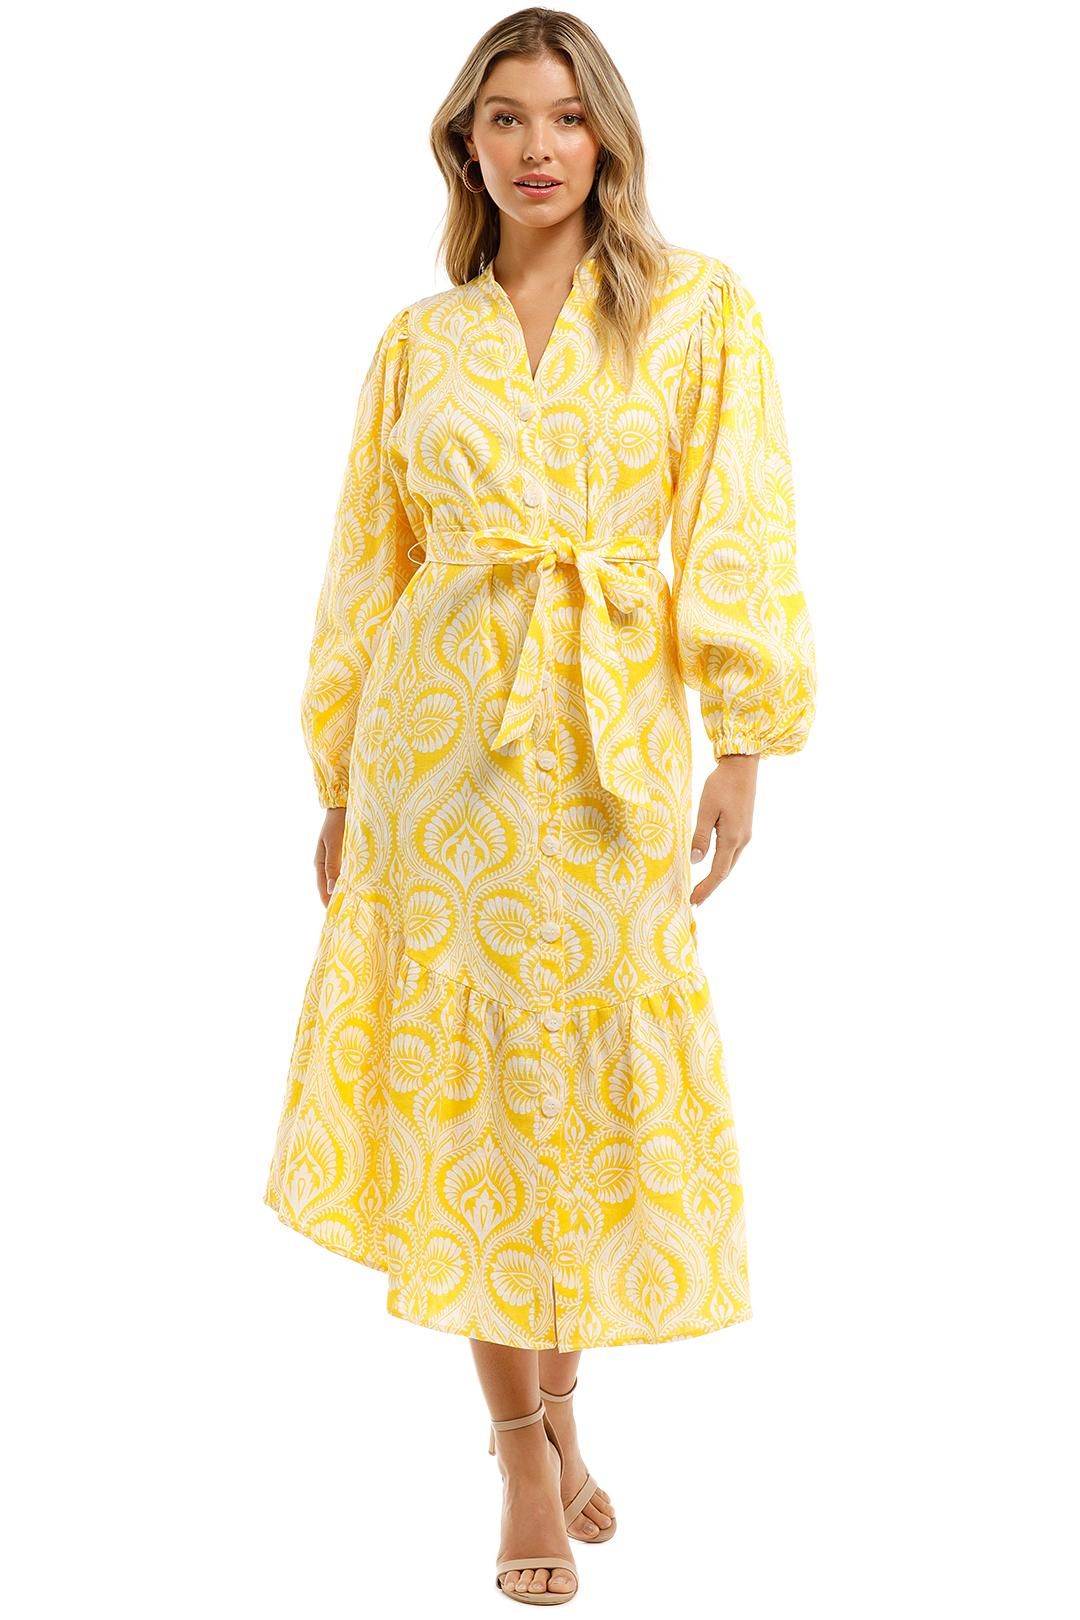 Country Road Print Yellow Wrap V Neck Long Sleeve Dress